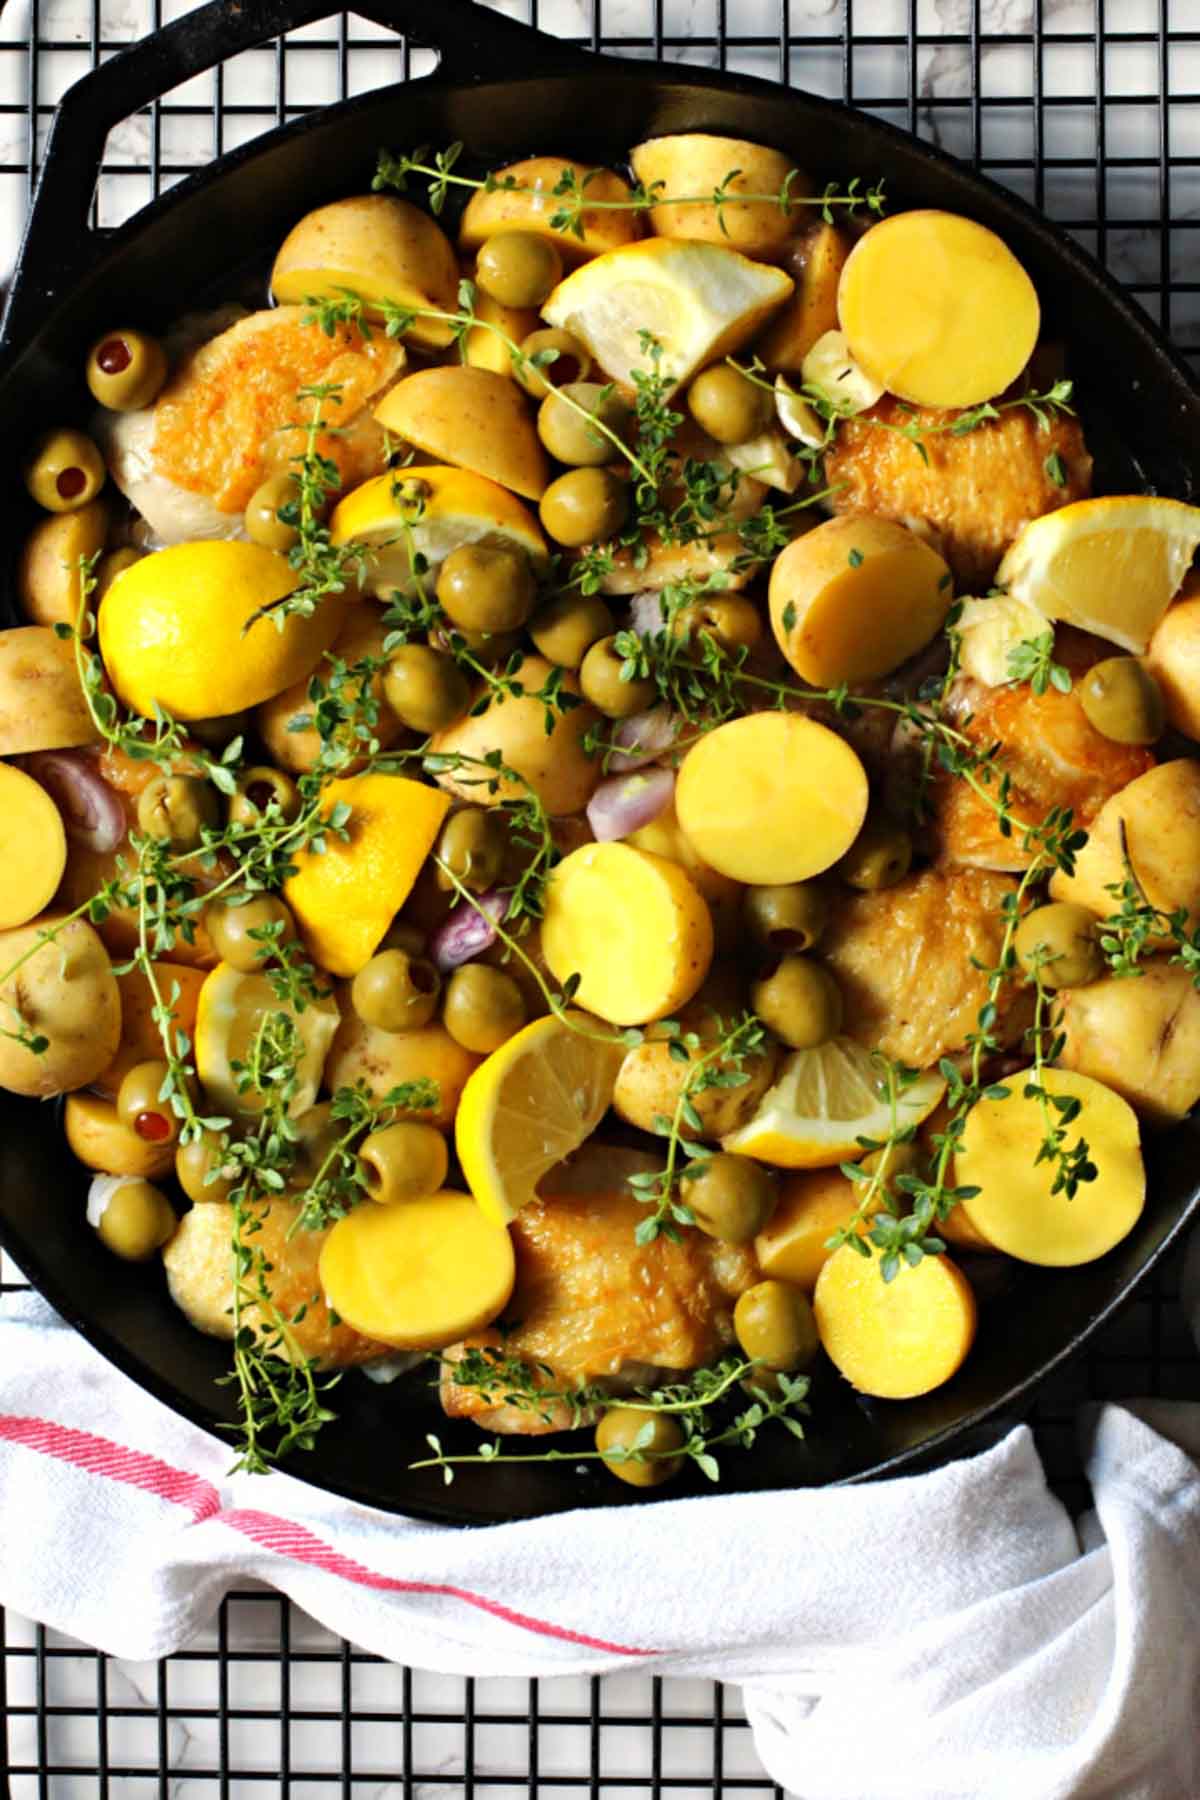 Yukon gold potatoes, chicken thighs, olives cooking in a cast iron skillet